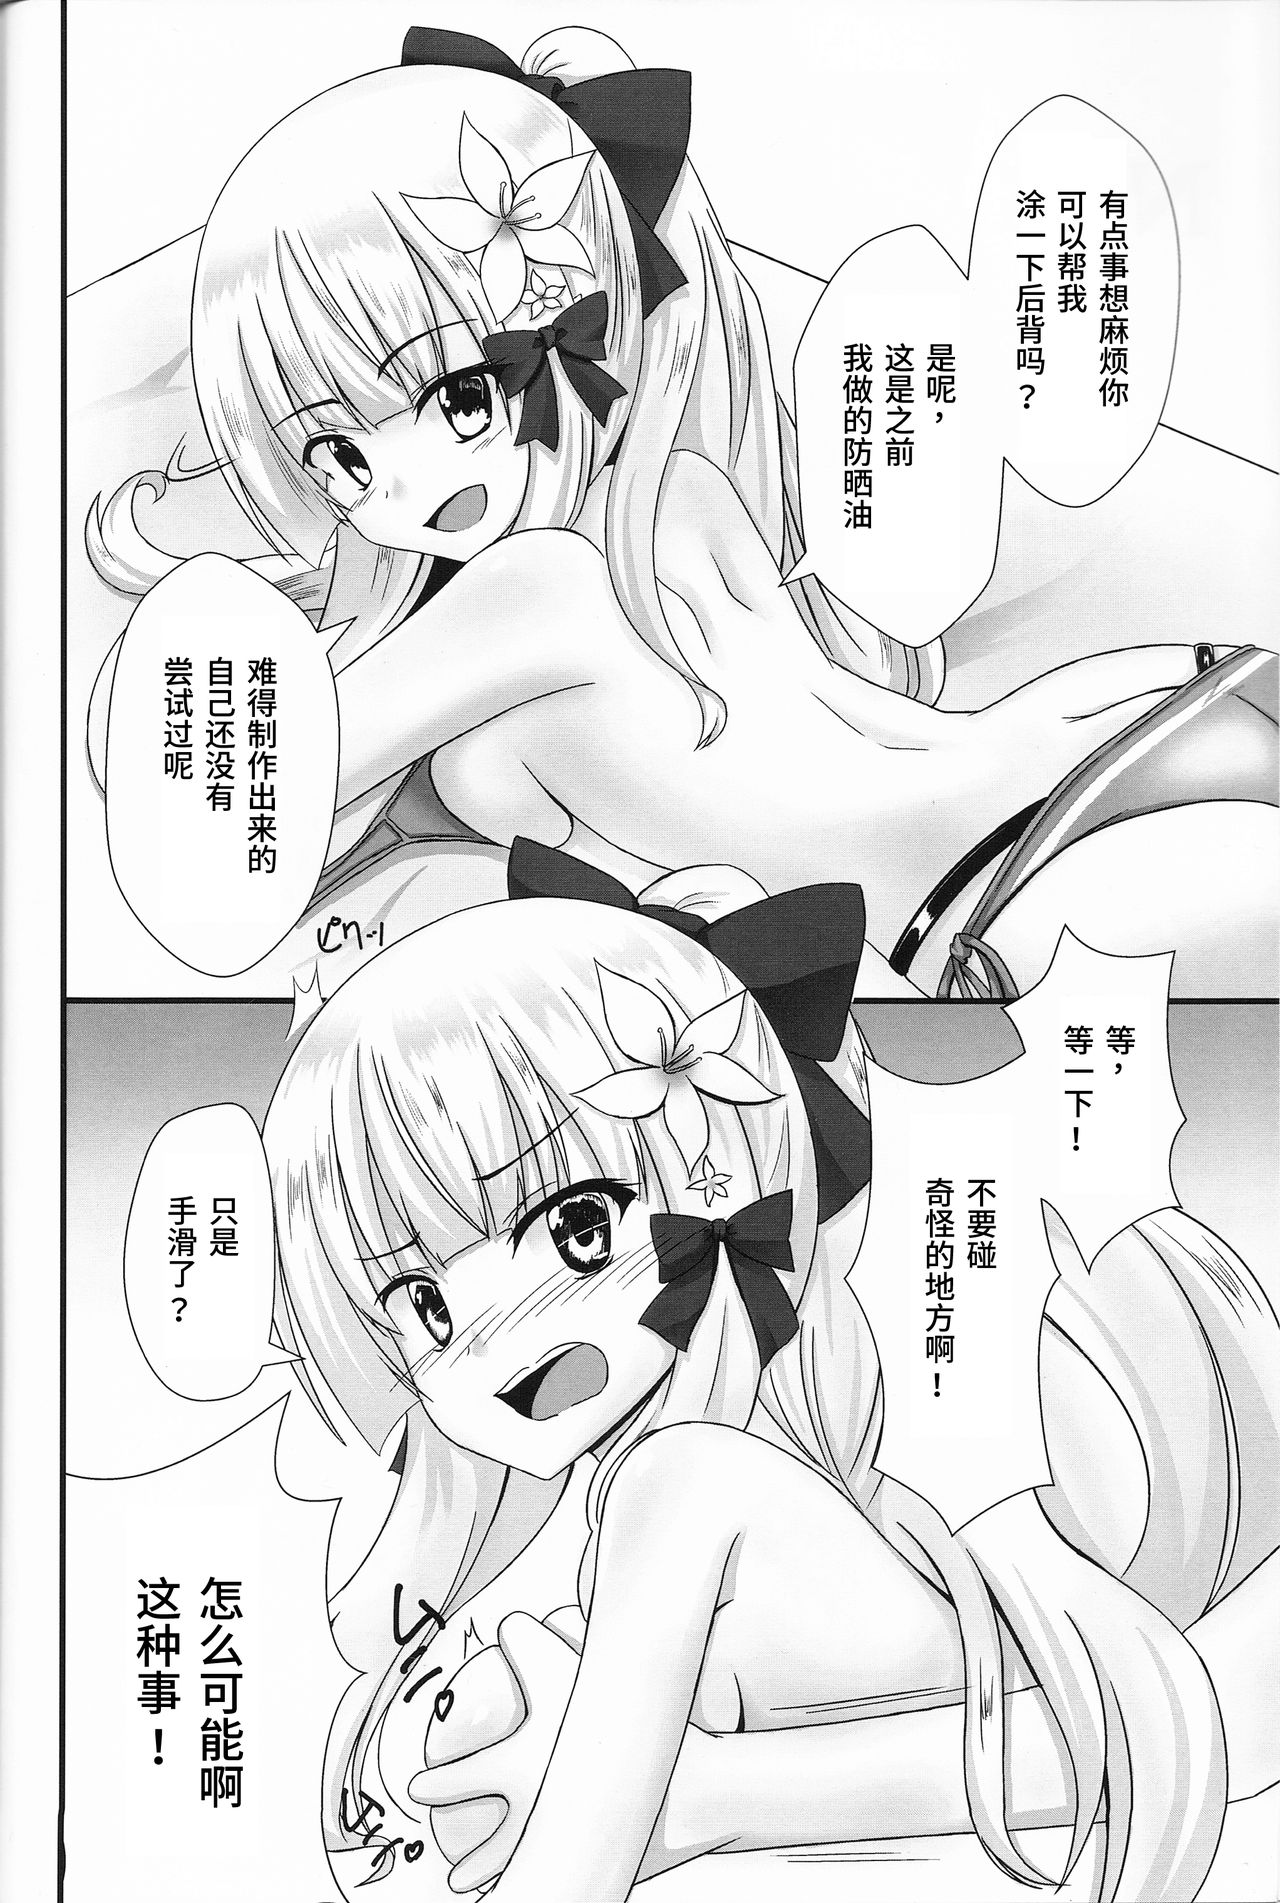 (COMIC1☆16) [A.S.Presents (Kanzaki Alia)] Connecting Select 2 (Princess Connect! Re:Dive) [Chinese] [精甚渣翻] (COMIC1☆16) [A.S.Presents (神咲アリア)] Connecting Select2 (プリンセスコネクト!Re:Dive) [中国翻訳]